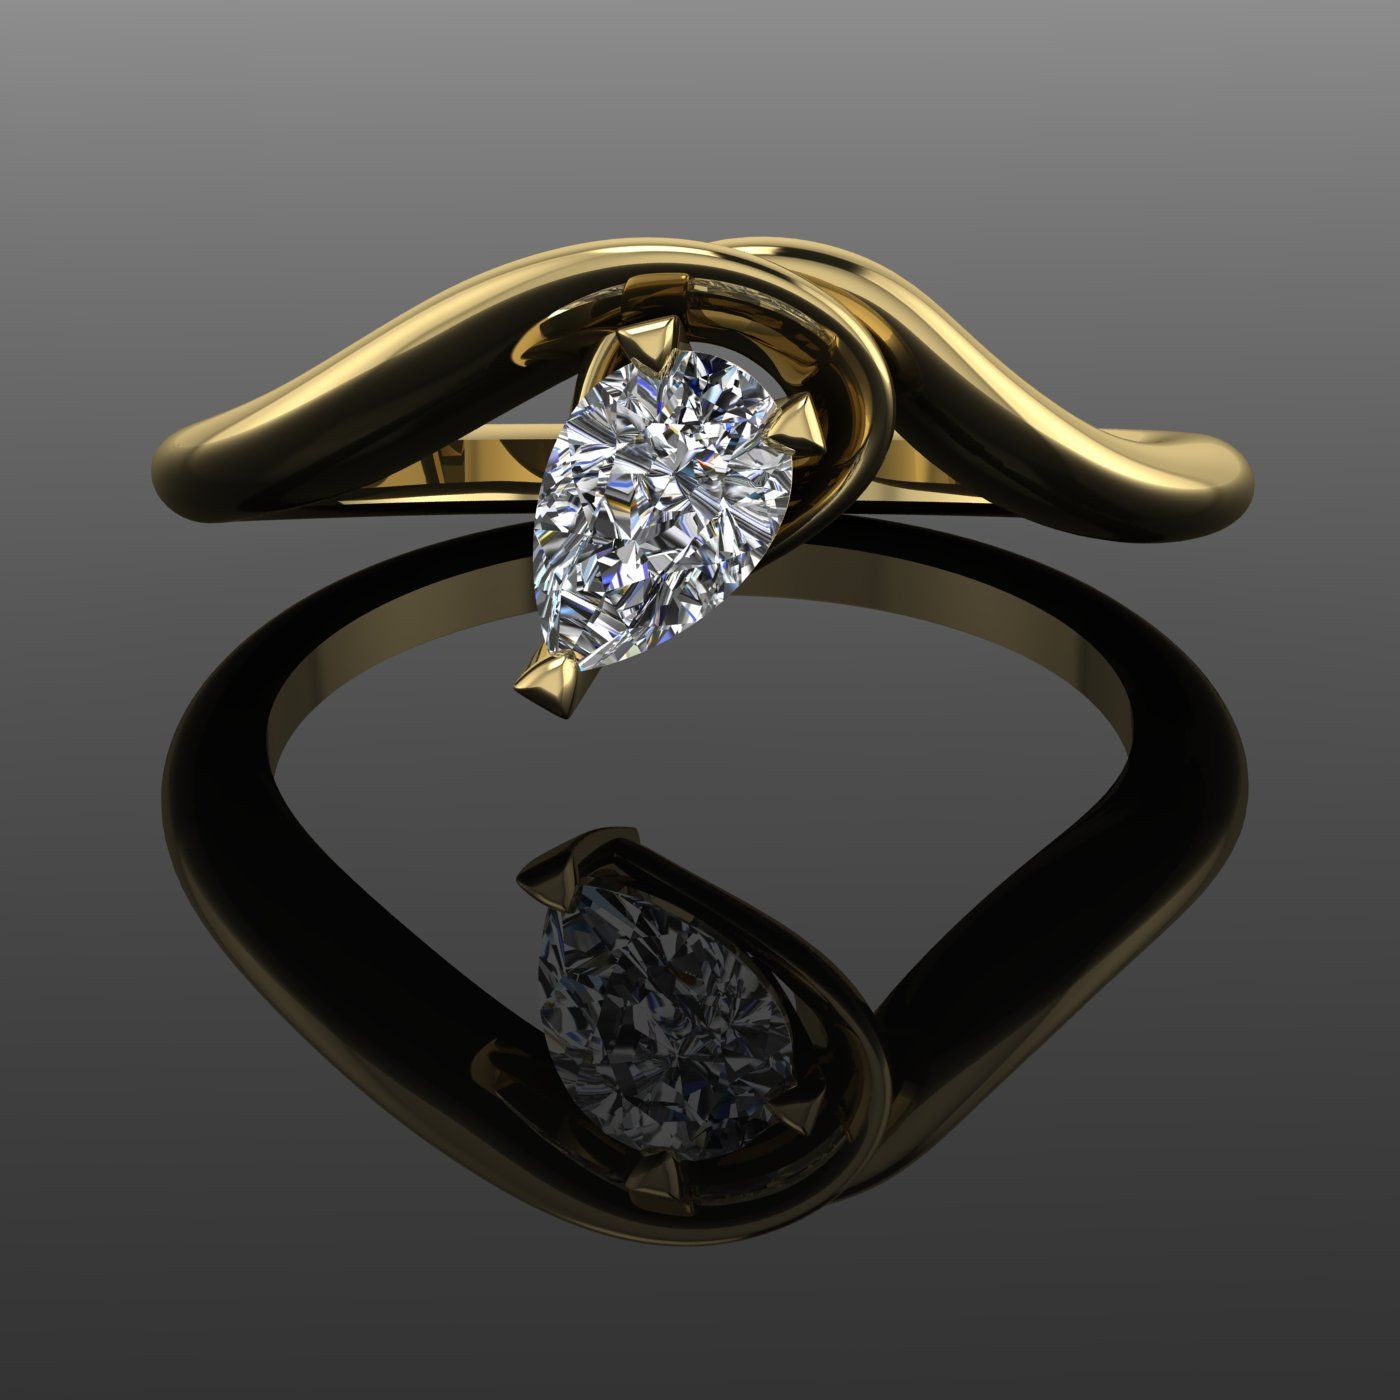 Sculpted, organic and enchantingly unusual diamond and yellow gold engagement ring.